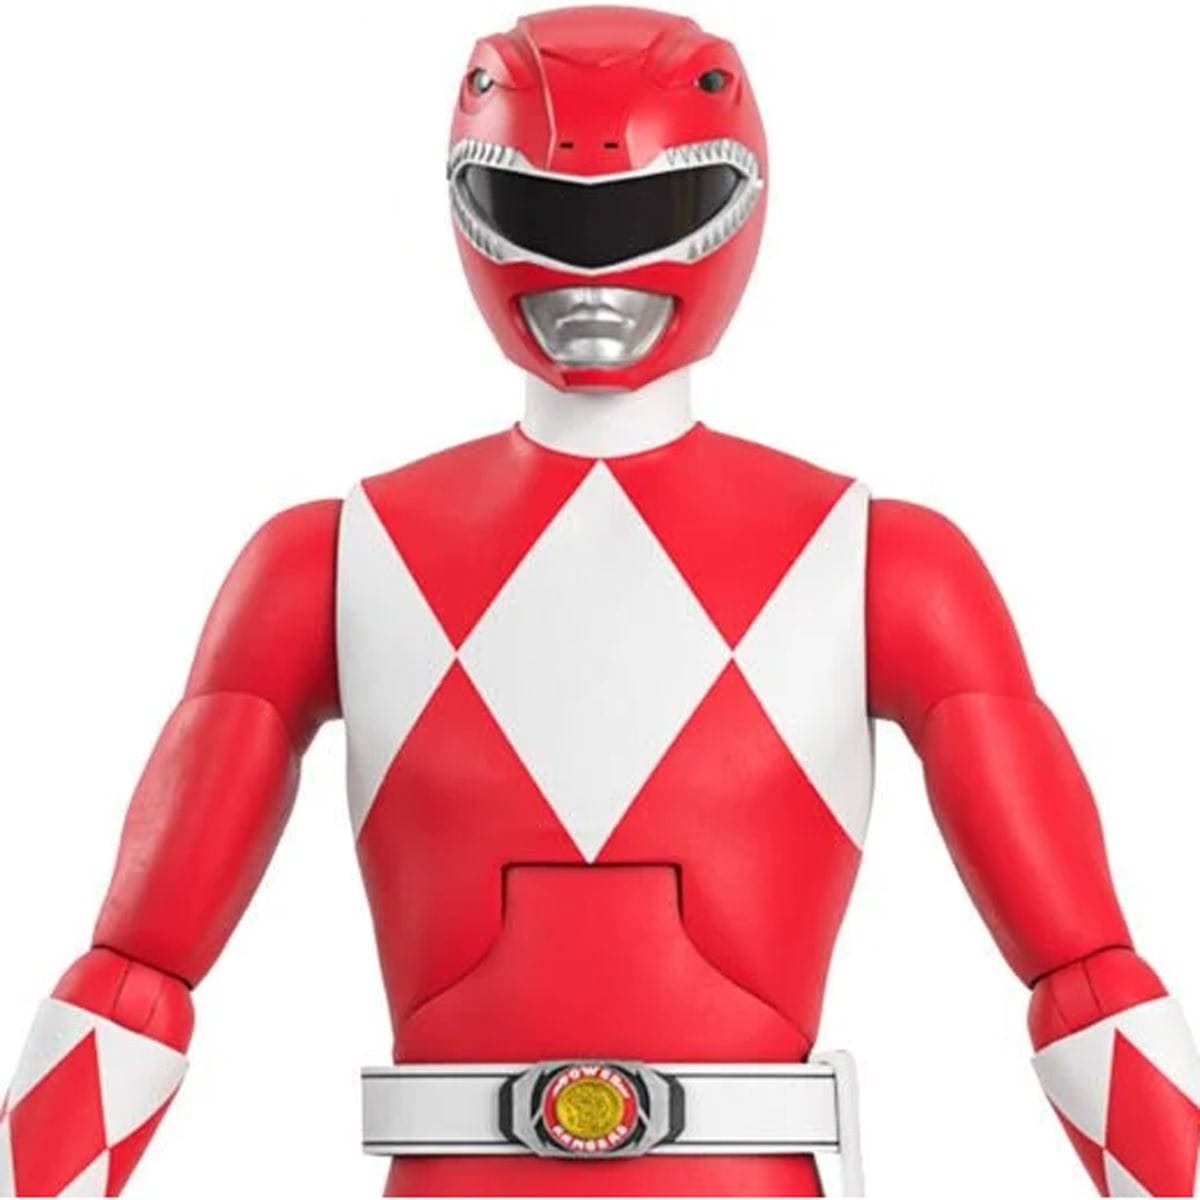 Power Rangers Ultimates Mighty Morphin Red Ranger 7-Inch Action Figure - Pop-O-Loco - Super7 Pre-Order